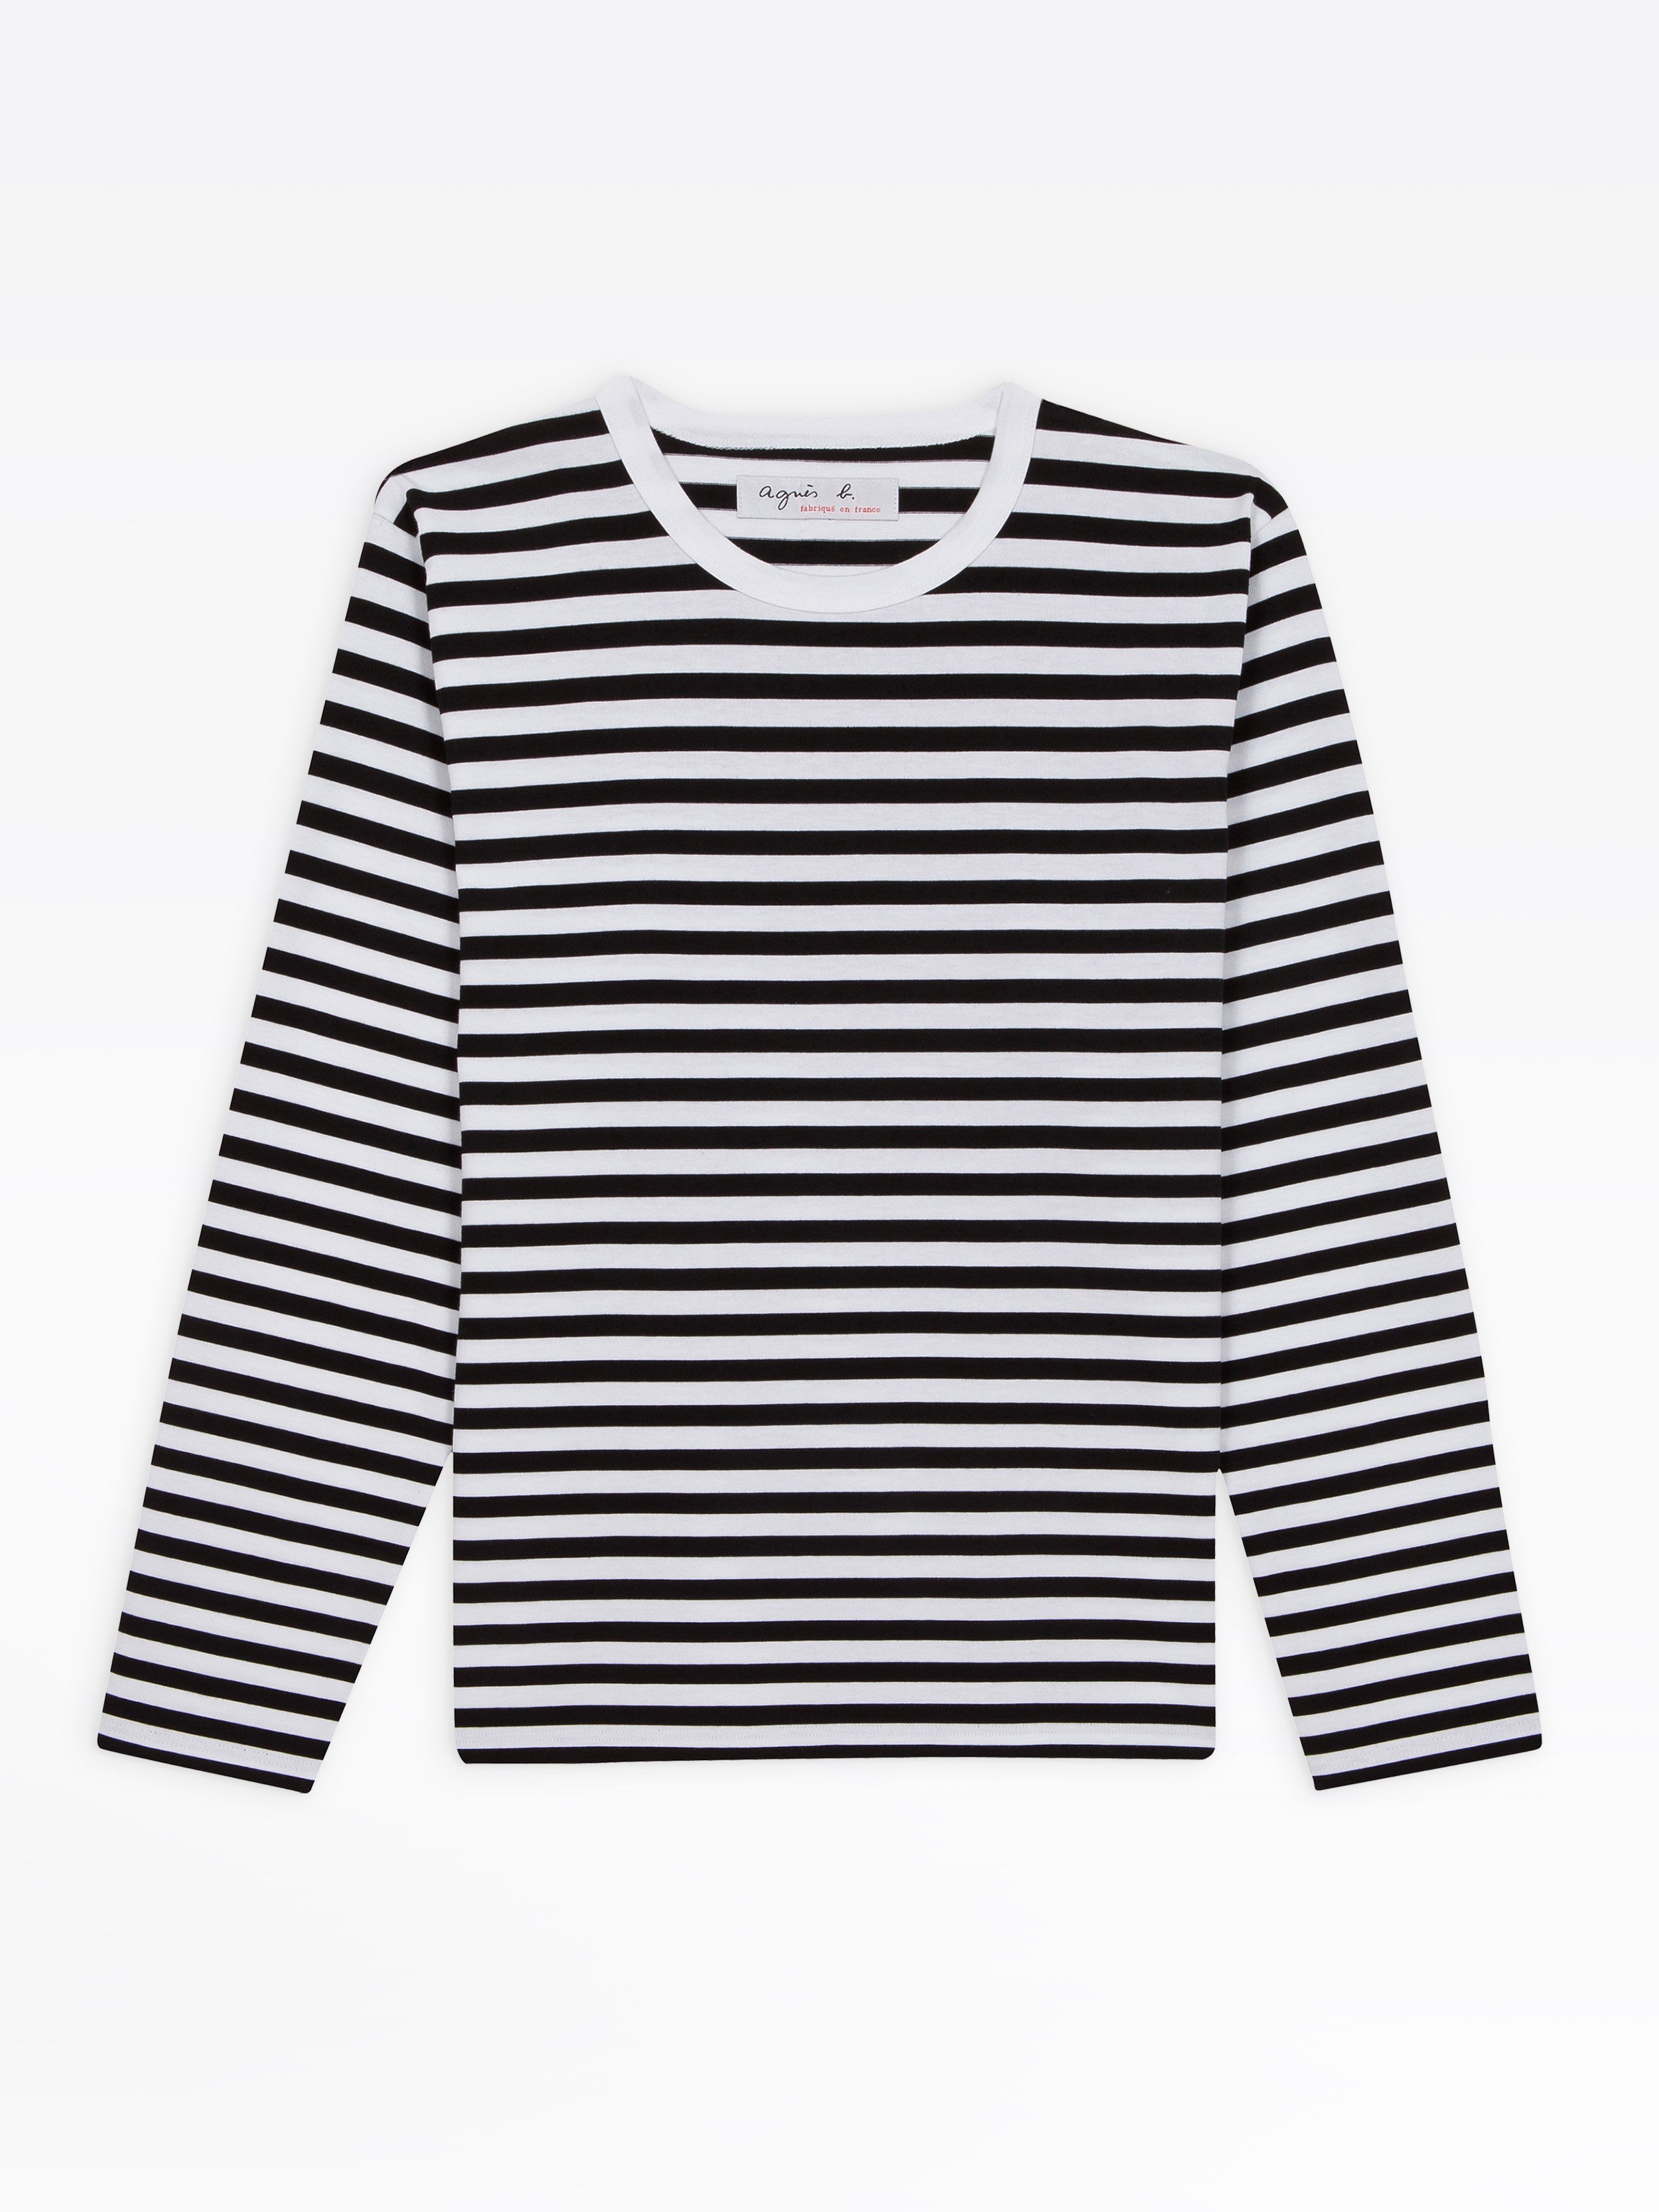 black and white long sleeves striped Coulos t-shirt